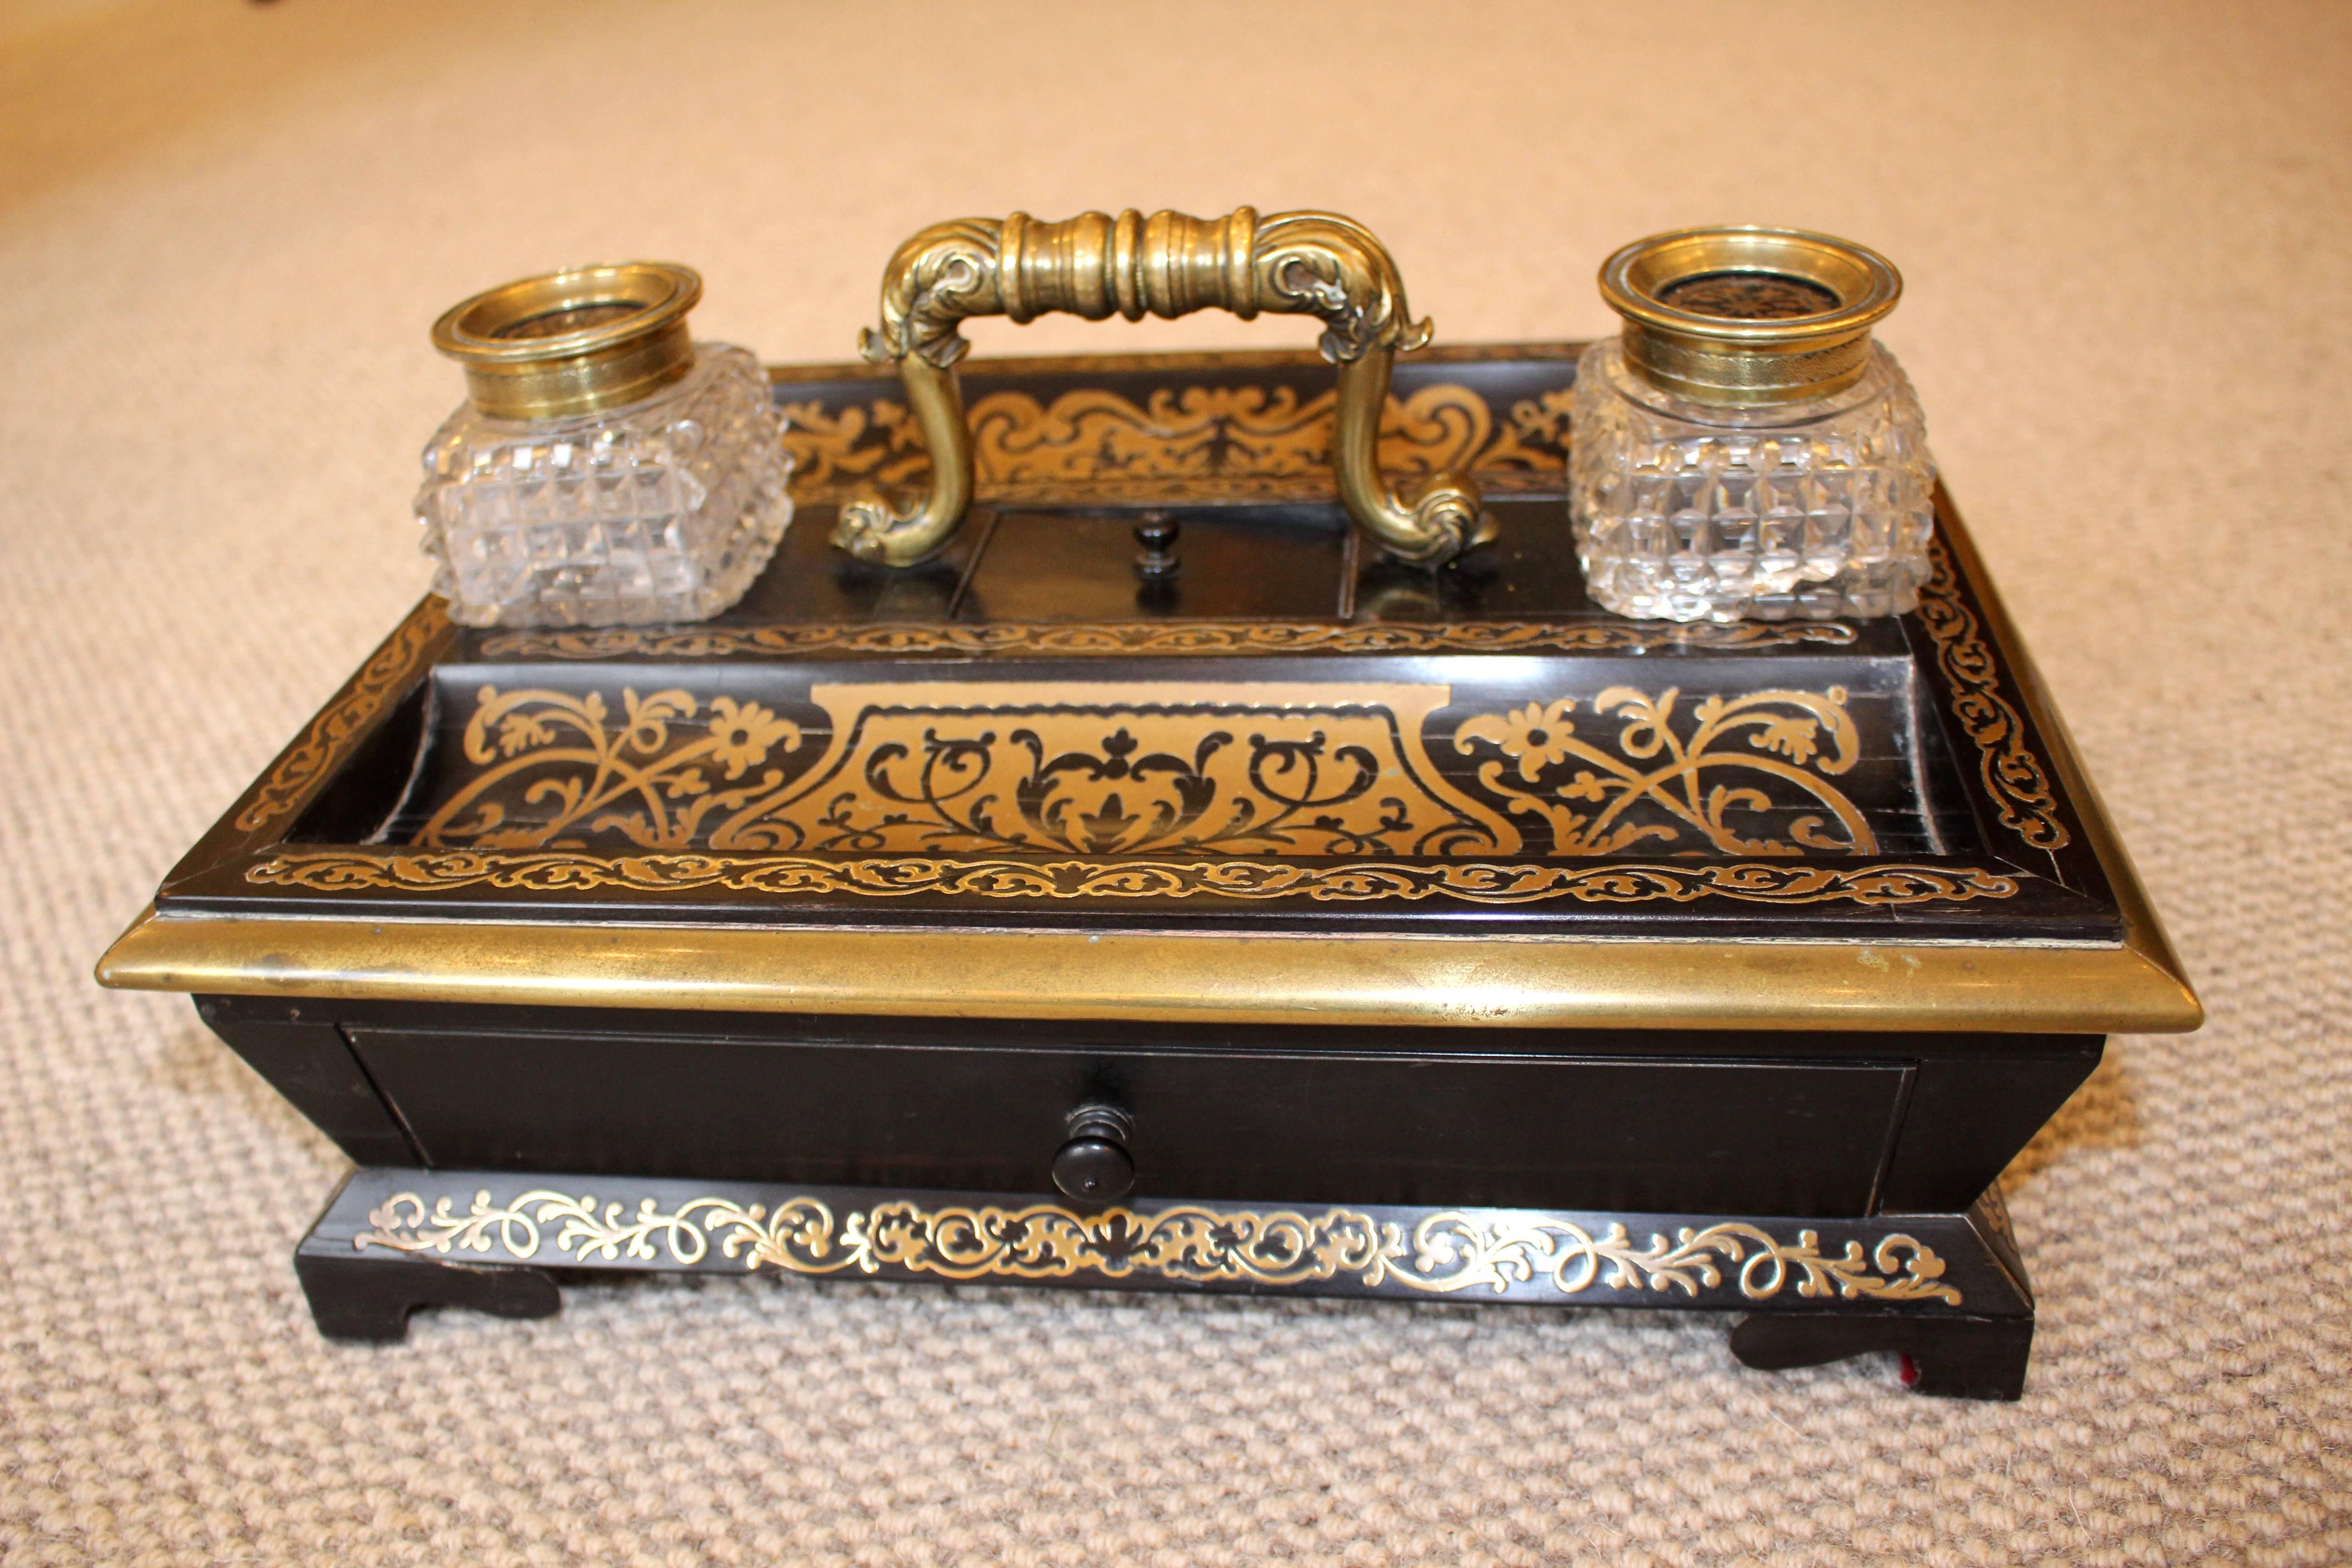 Here we have a highly decorative and beautifully made mid 19th Century Ebony and Boulle Inkwell or Desk Stand. Having two cut glass inkwells with tooled brass lids with central brass decoration. Front and rear pen trays with a small central lidded